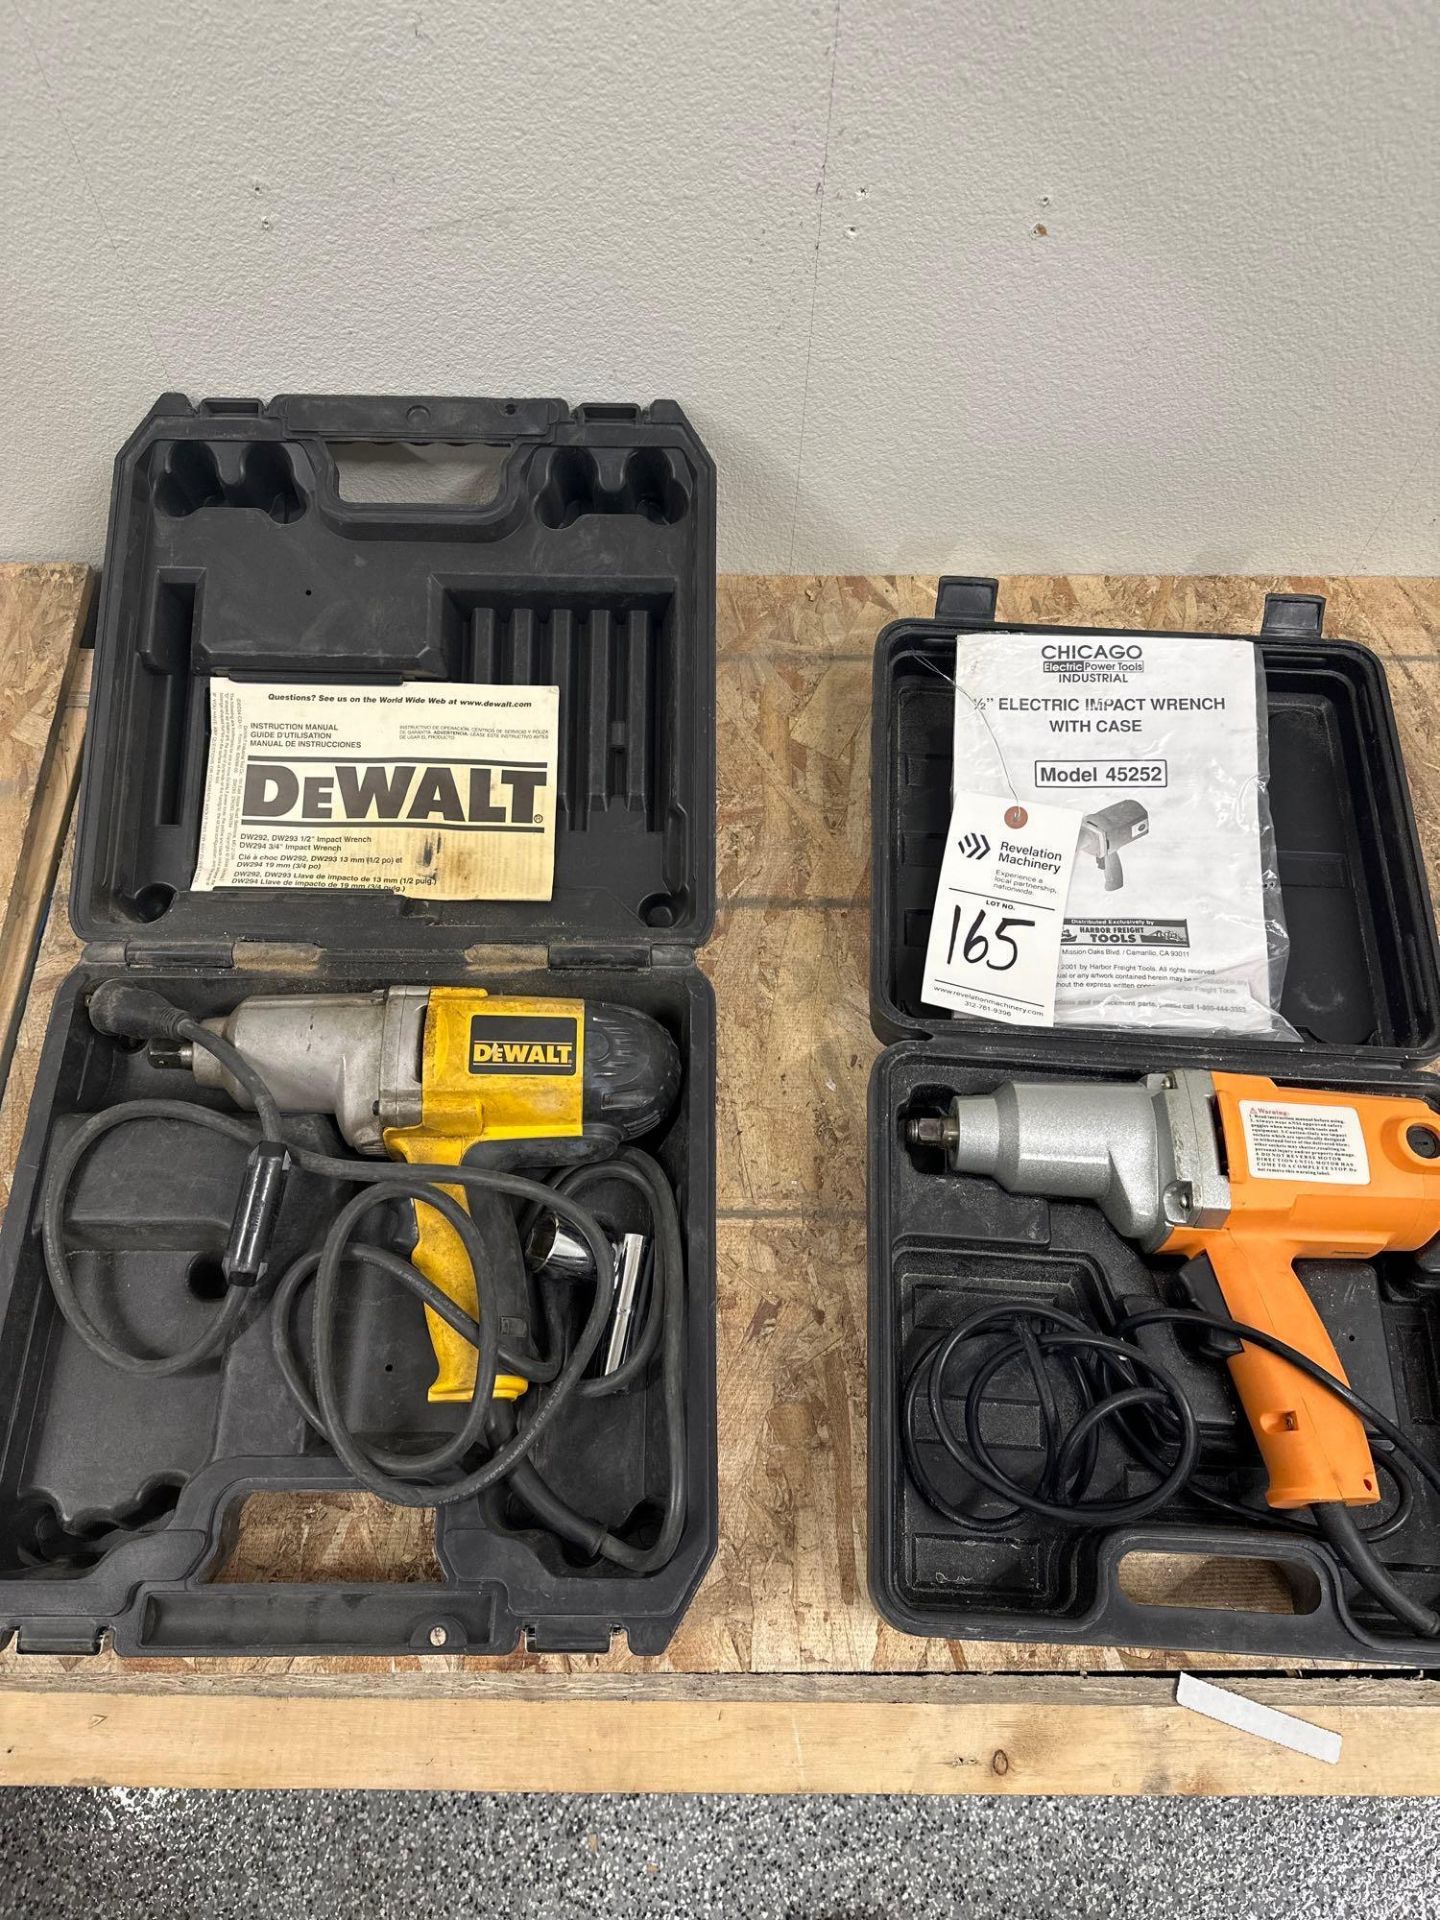 DEWALT IMPACT WRENCH AND CHICAGO ELECTRIC 1/2” ELECTRIC IMPACT WRENCH